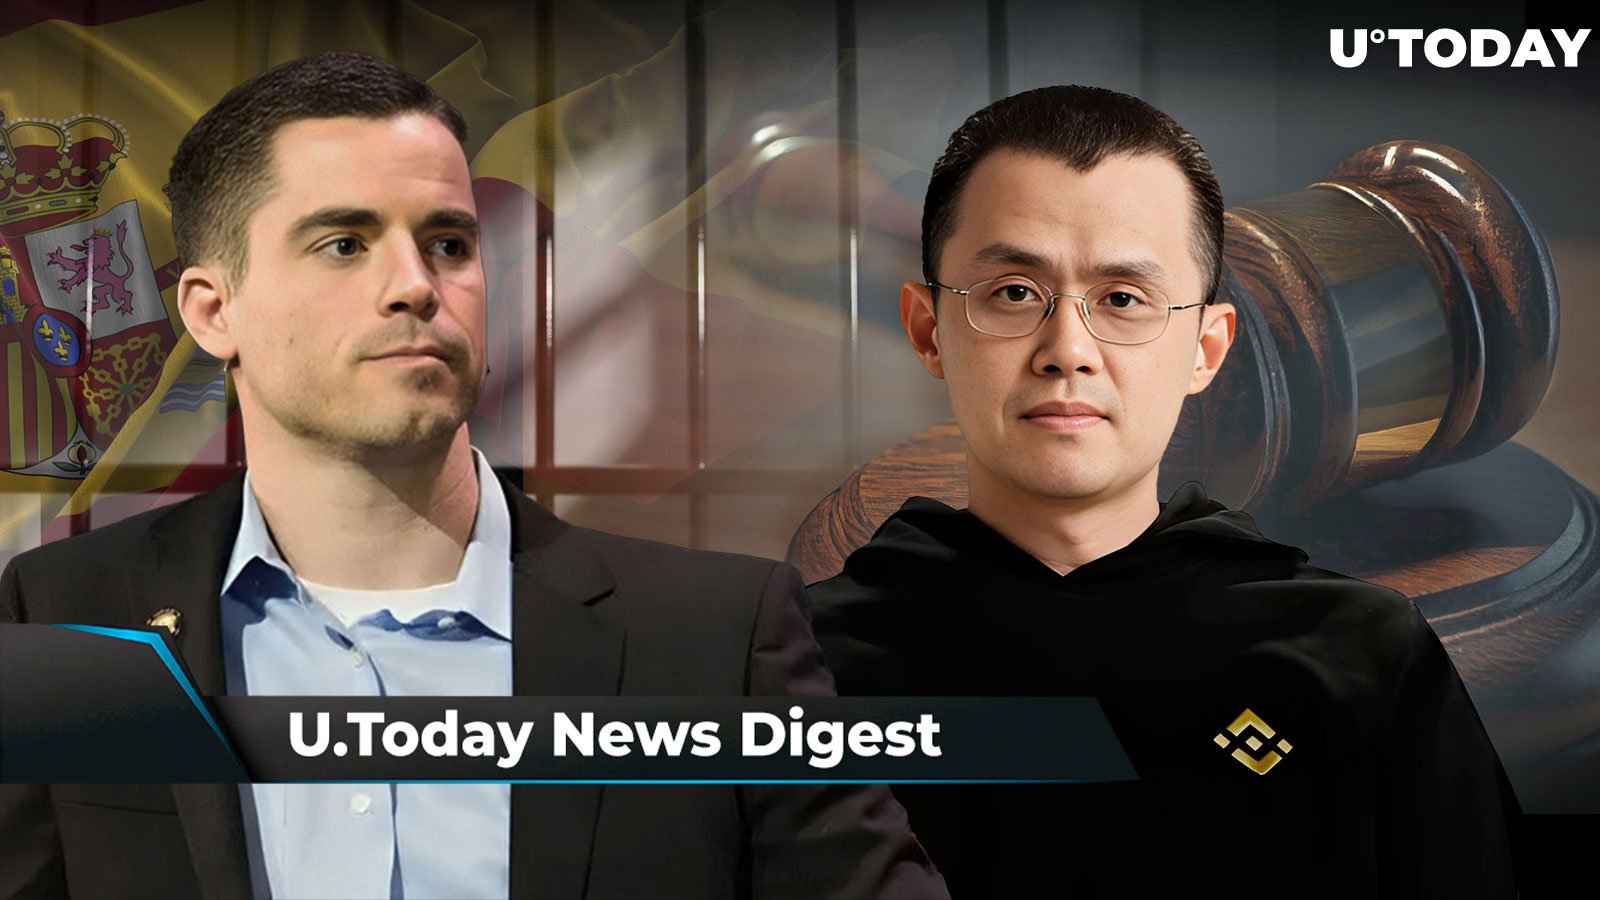 'Bitcoin Jesus' Roger Ver Arrested in Spain, Former Binance CEO CZ Sentenced to Months in Prison, XRP Advocate Exposes Key SEC Weakness: Crypto News Digest by U.Today